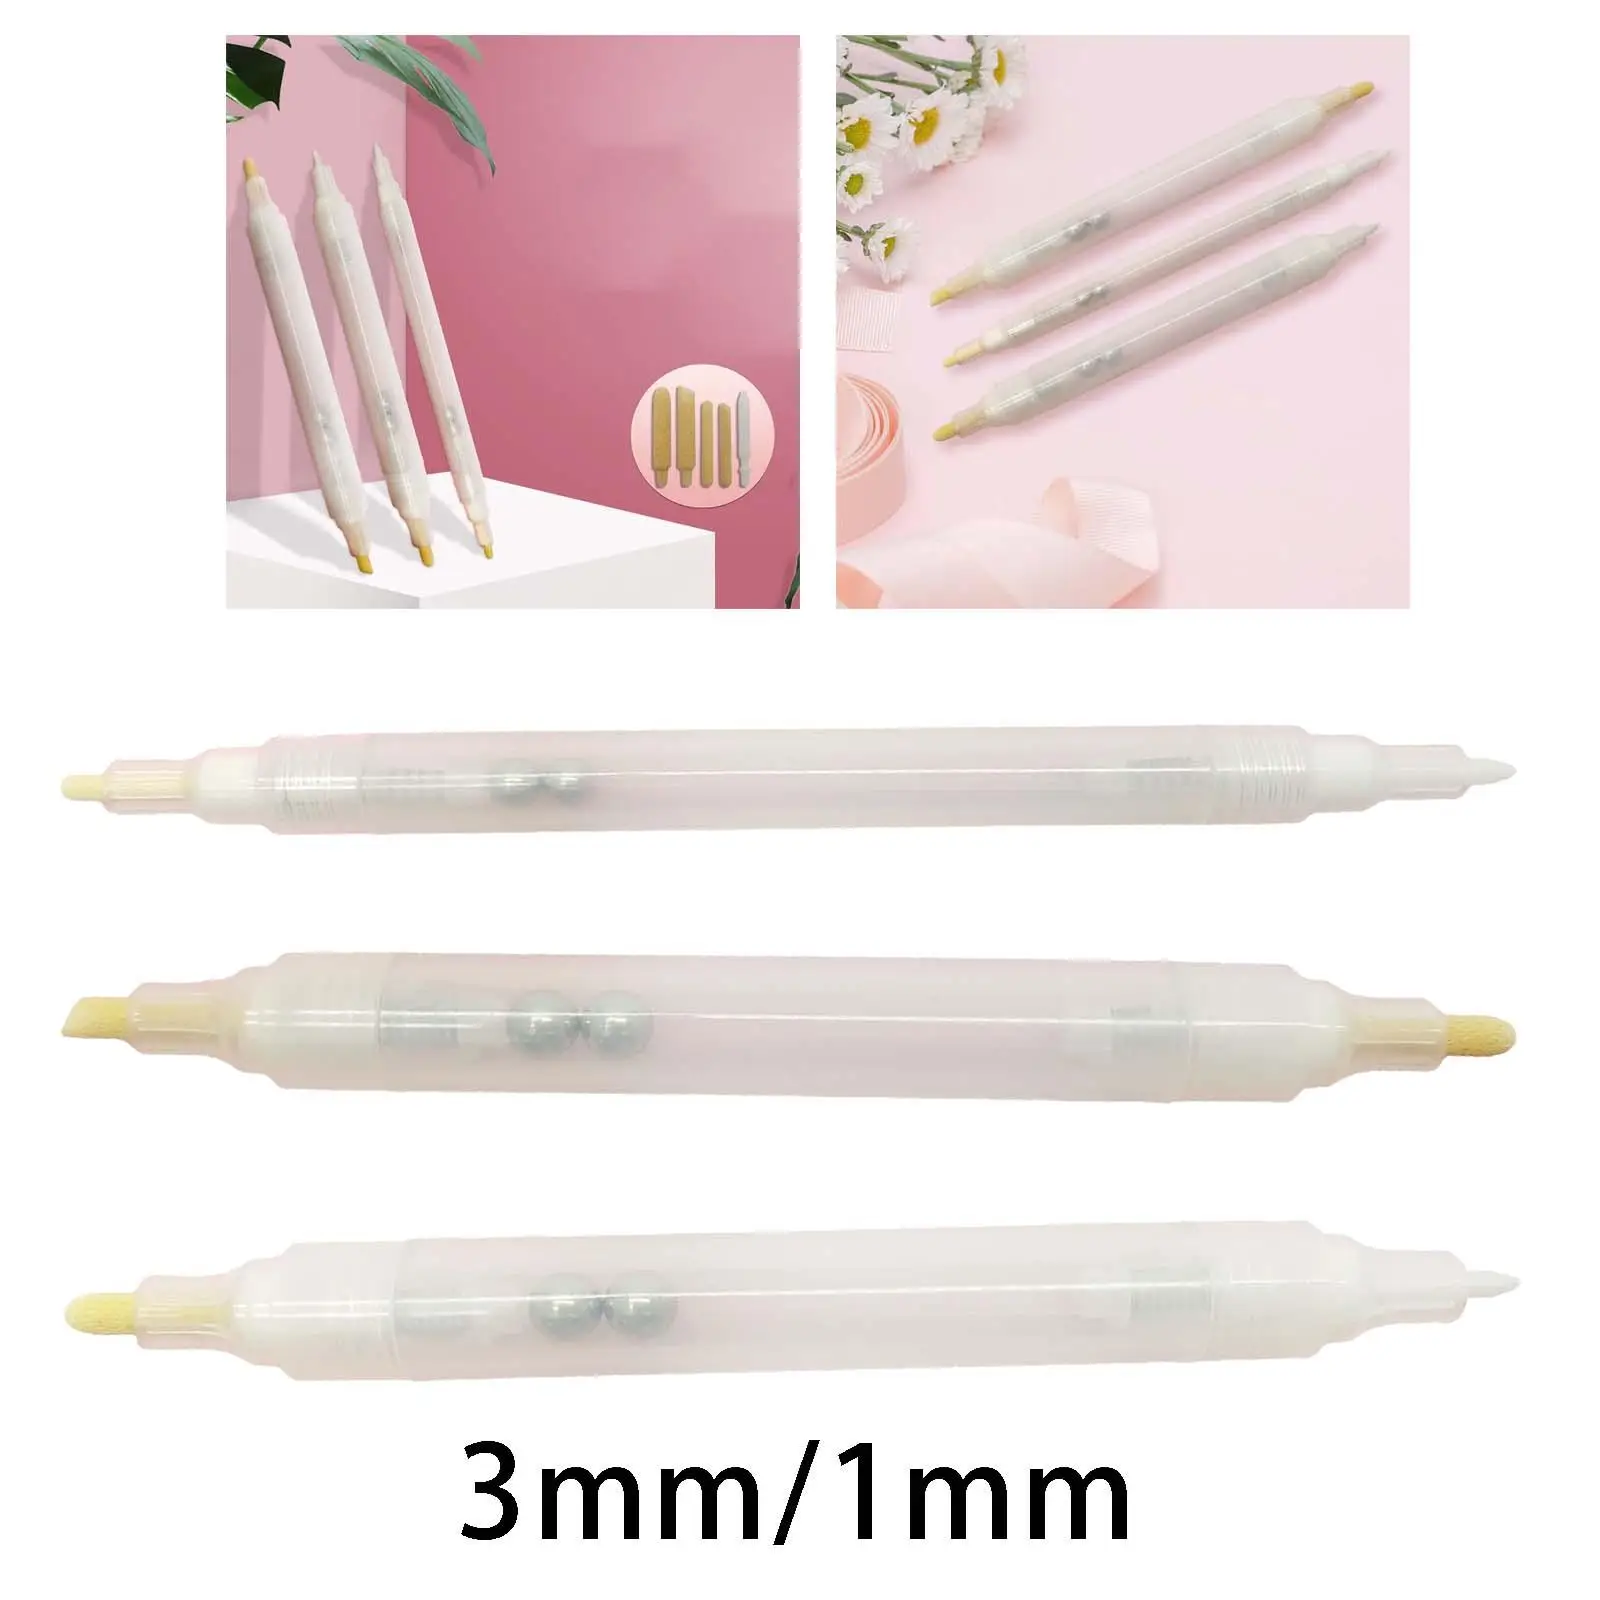 3 Pieces Professional Empty Refill Pen Double Head DIY Penholder Tool Empty Marker Tube for Drawing Craft Lettering Graffiti Art